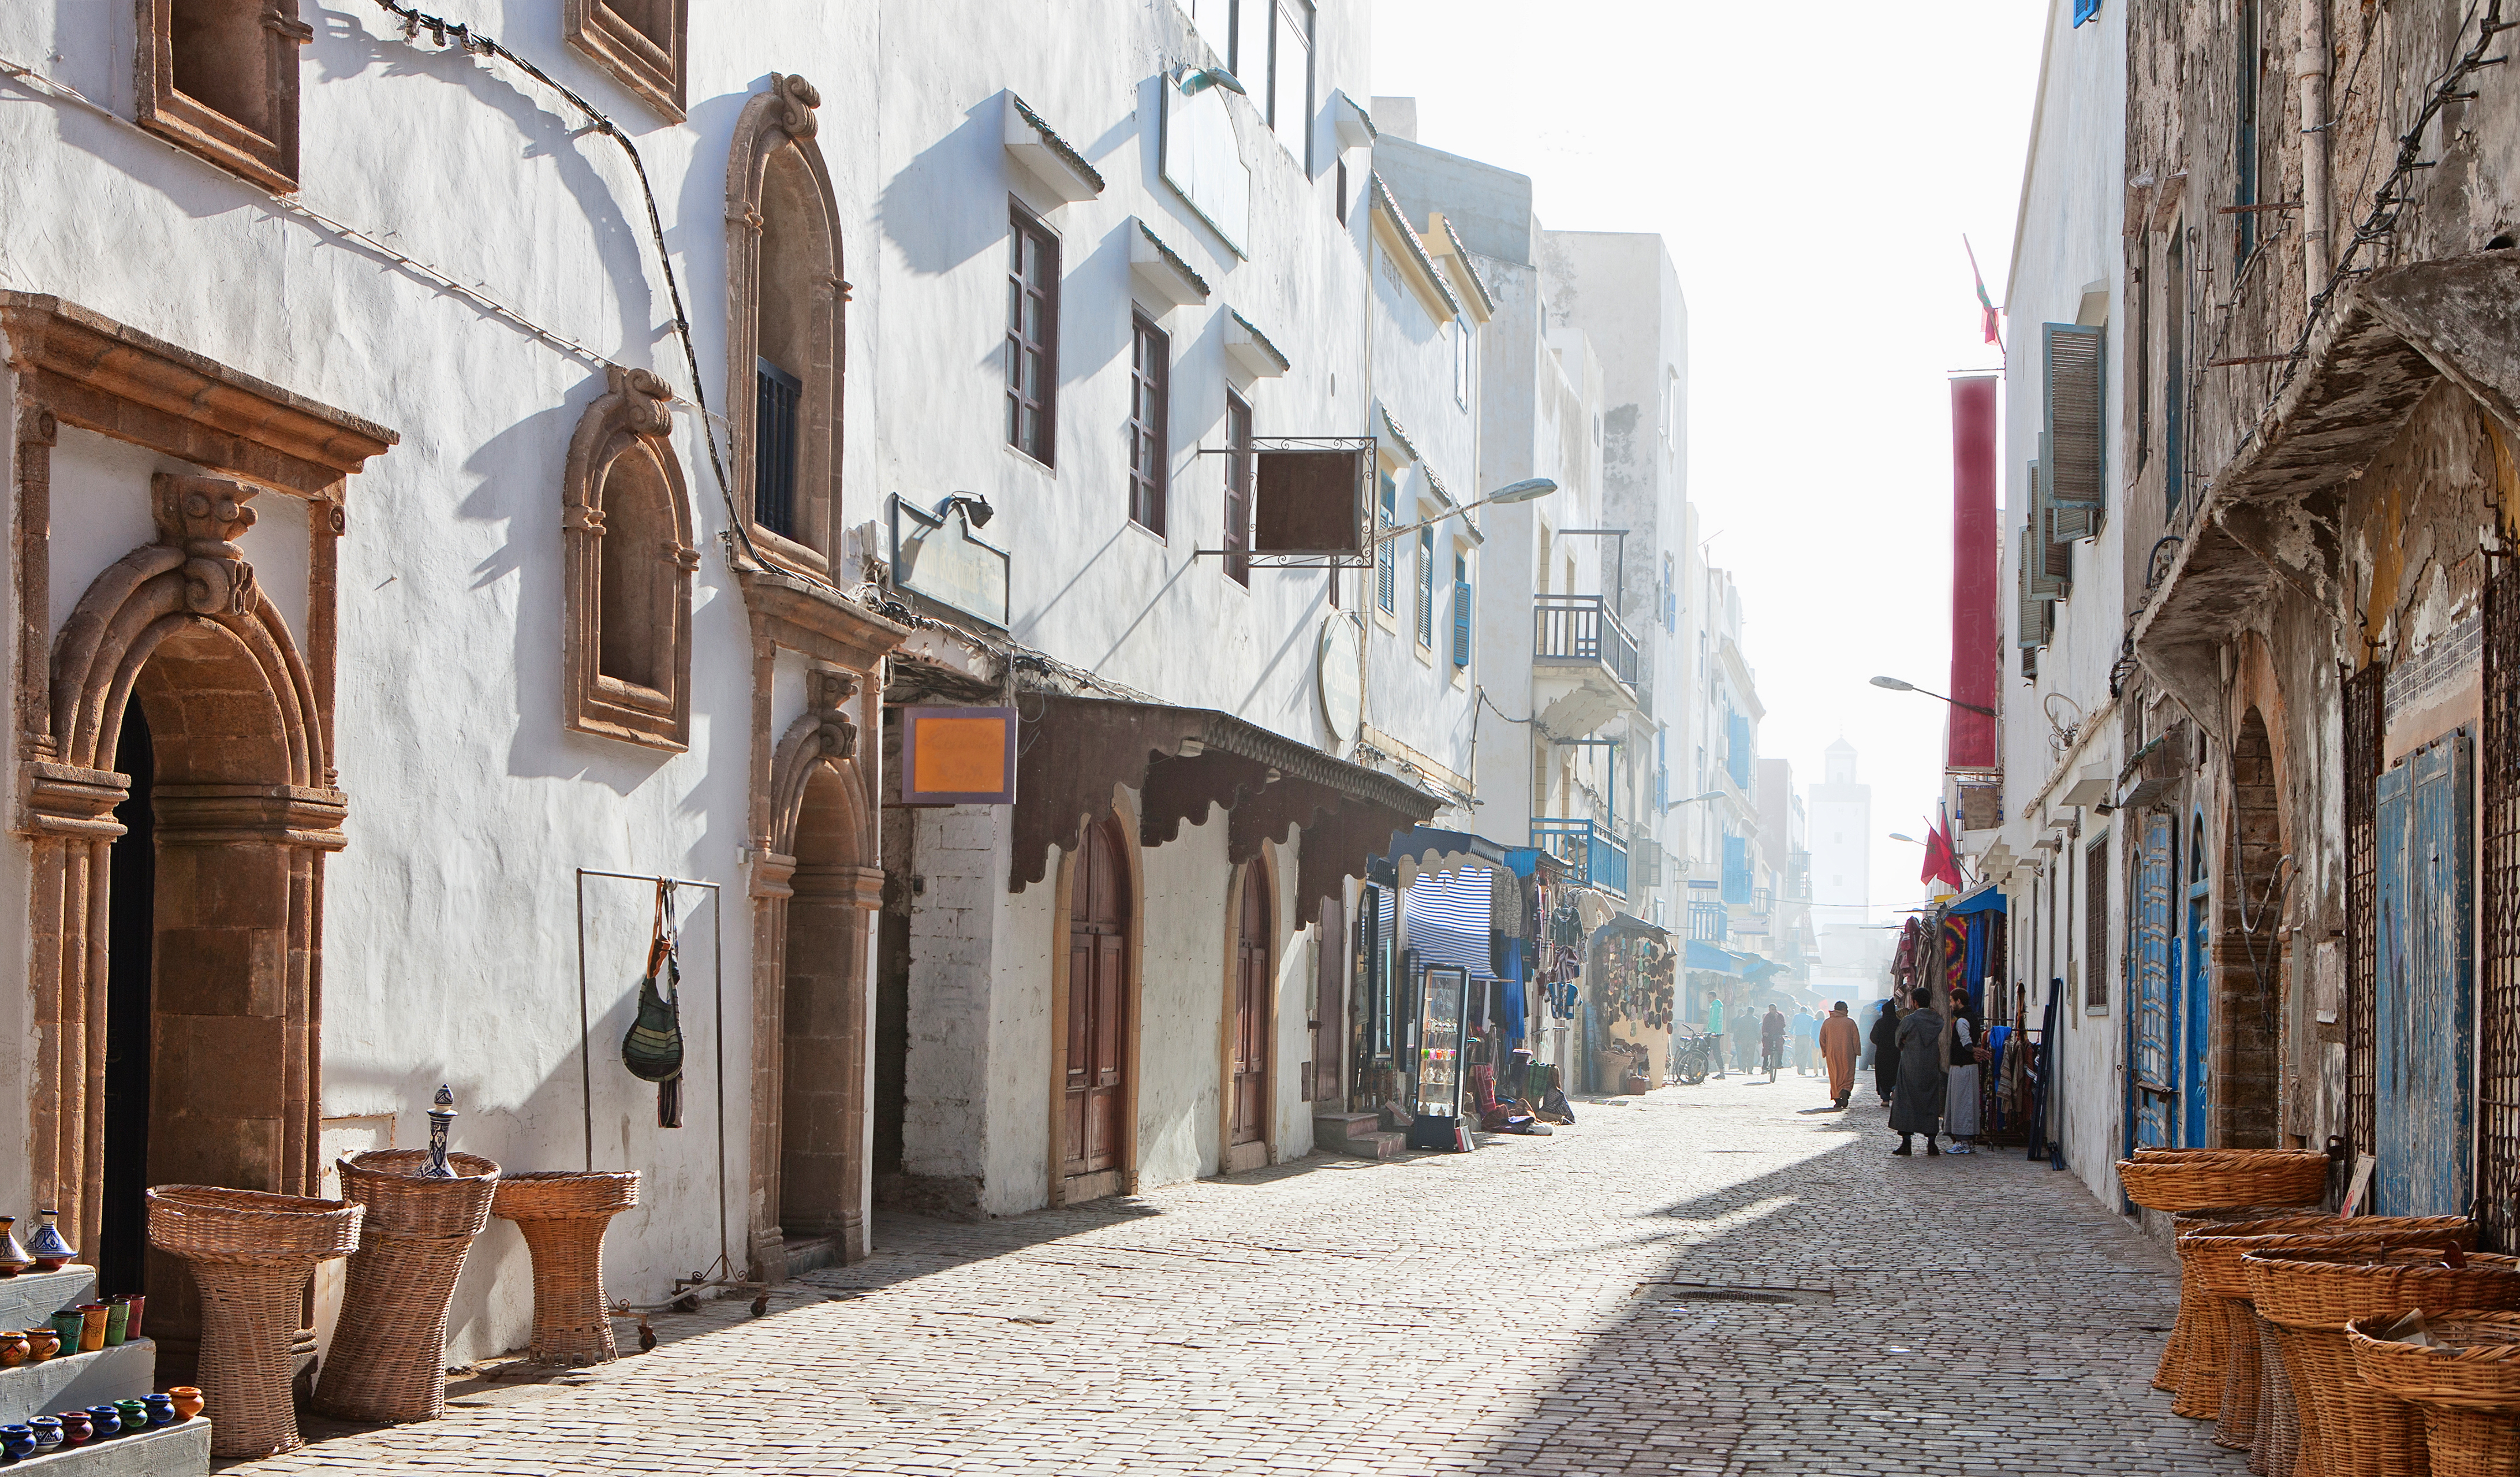 A light morning mist over the whitewashed streets of Essaouira